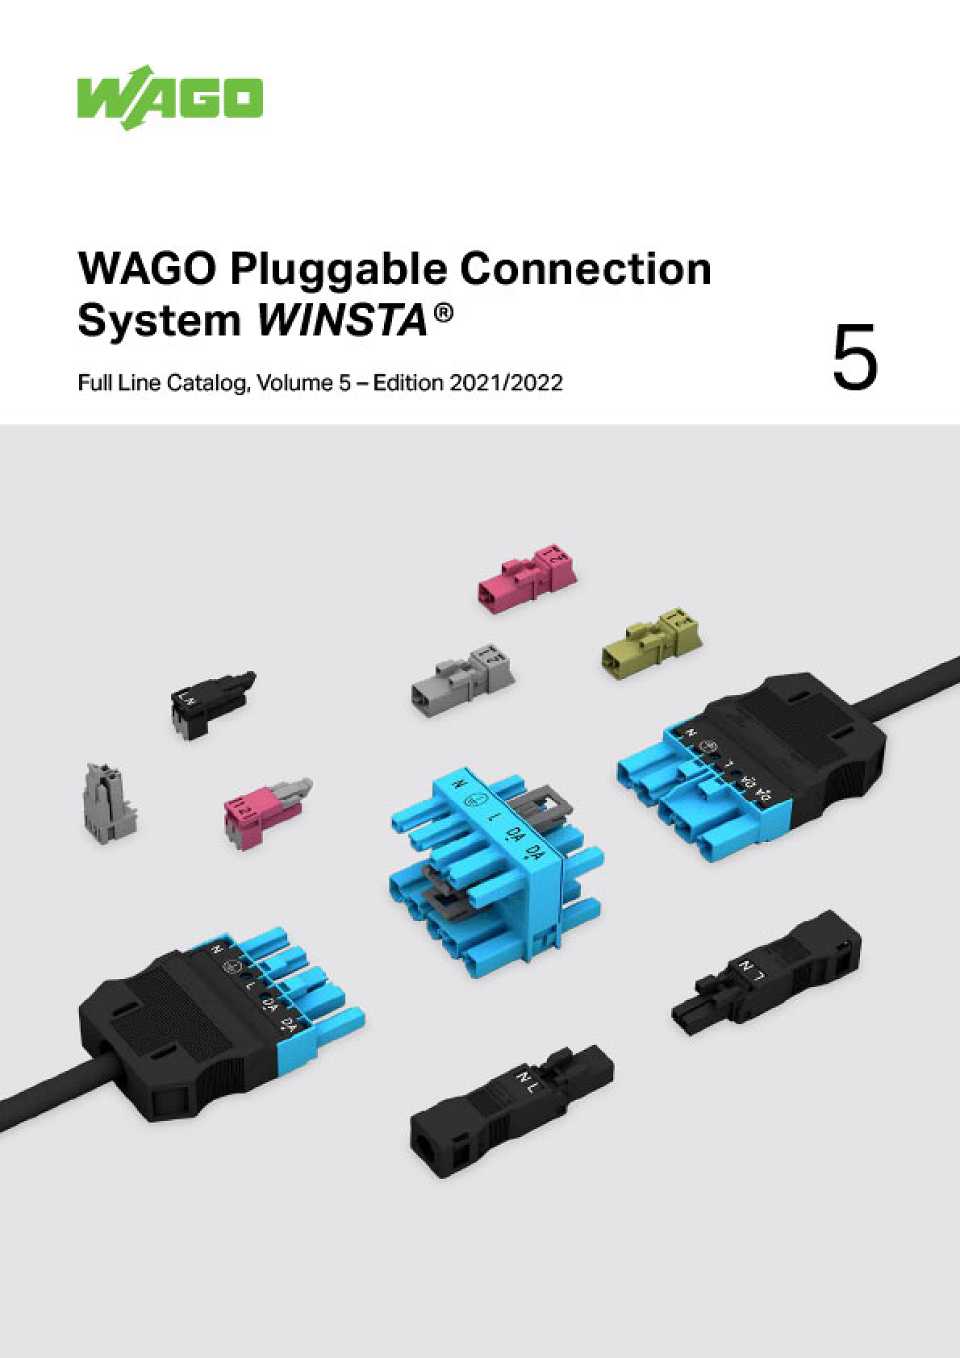 Pluggable Connection System WINSTA Catalogue Cover